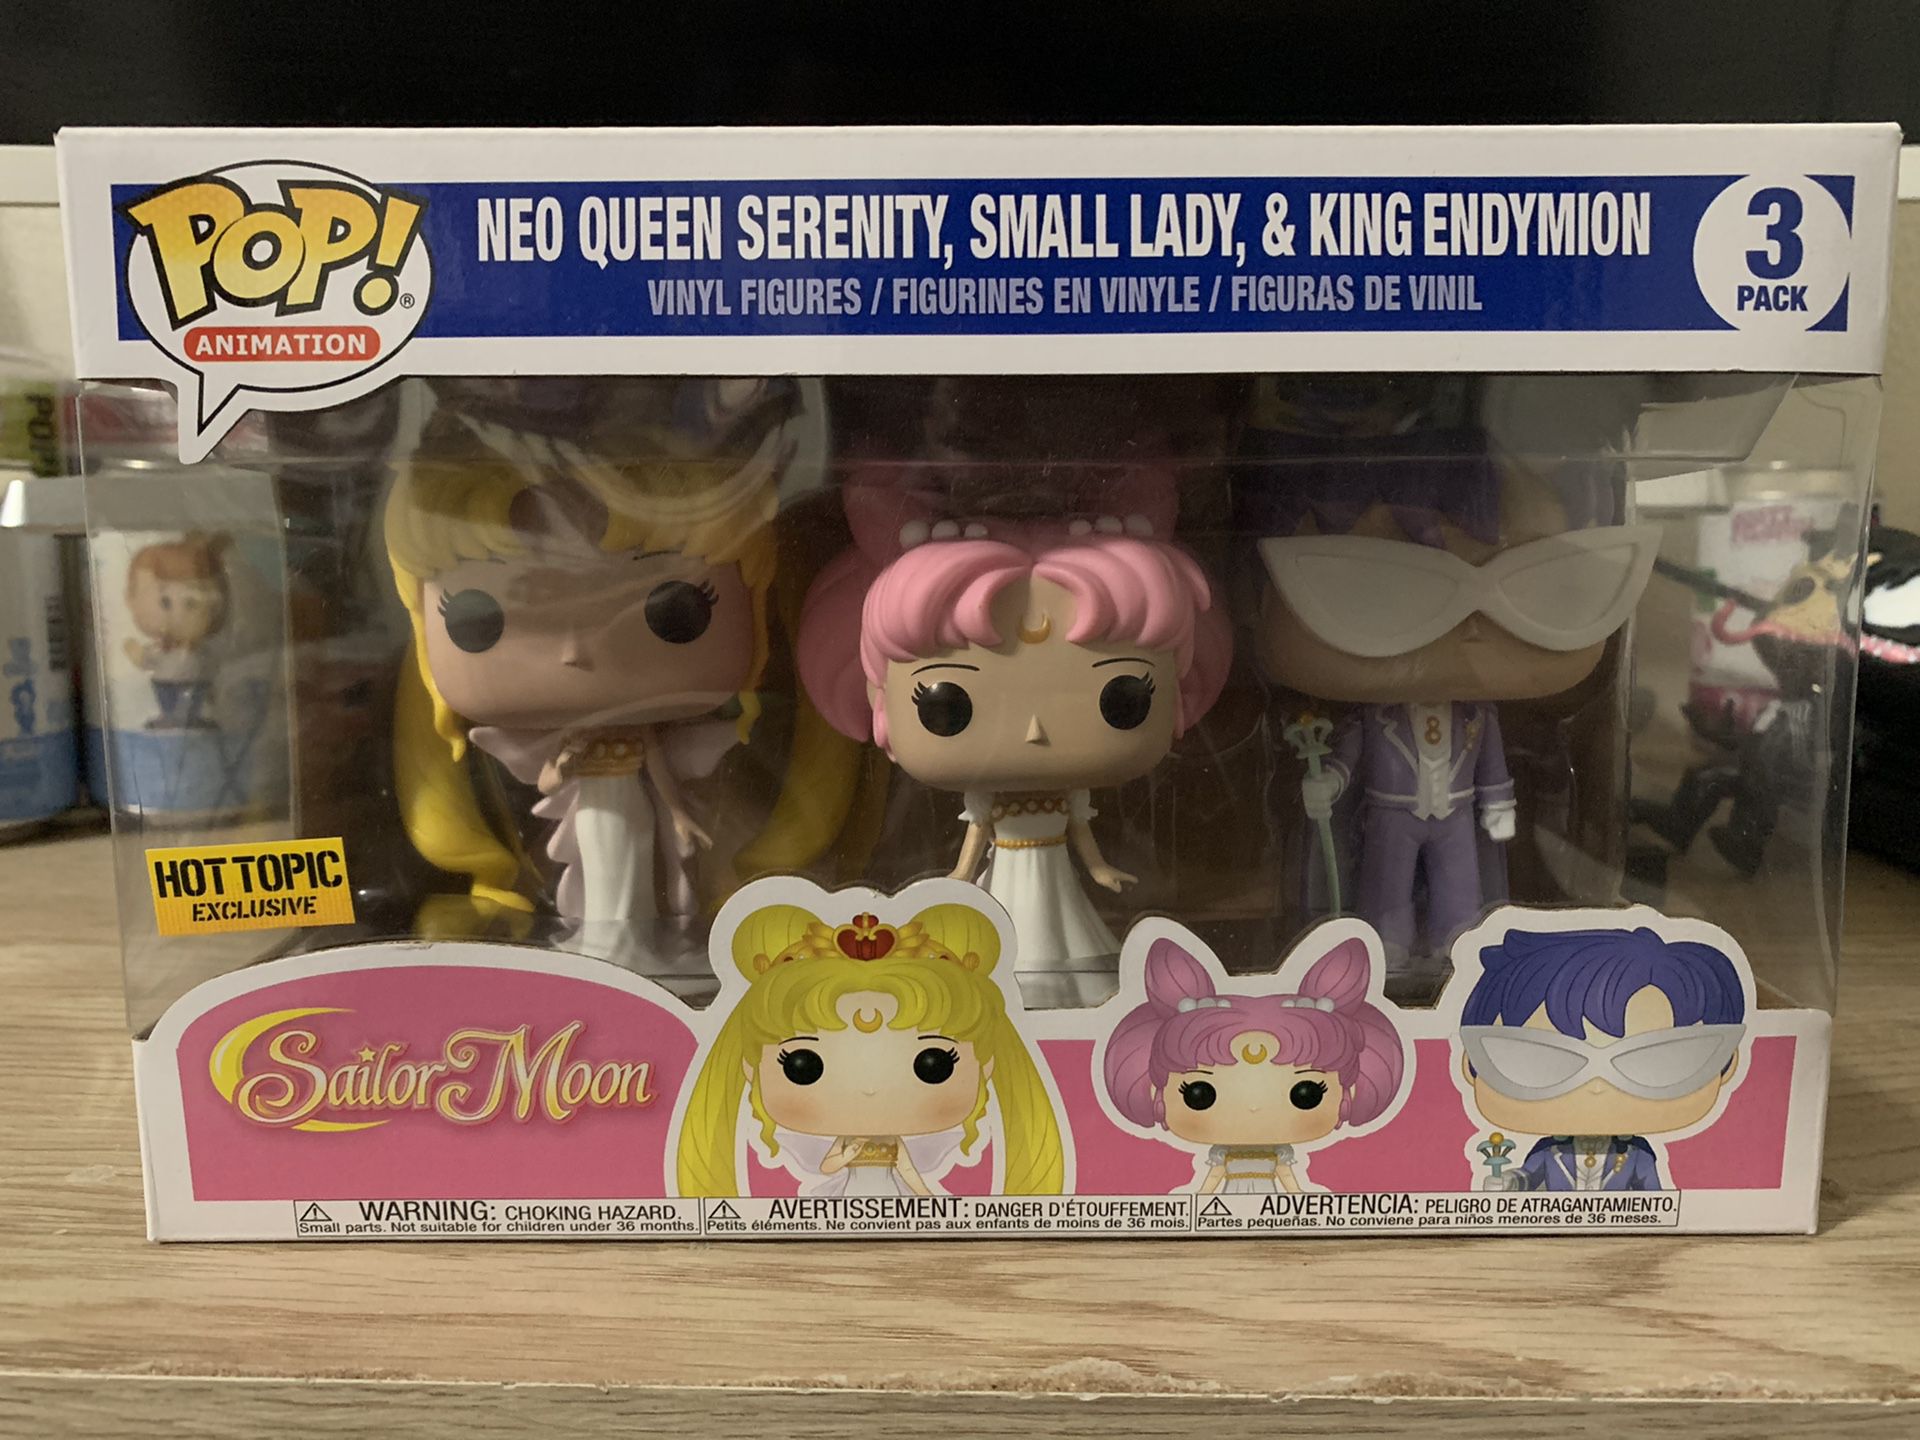 Sailor moon 3 Pack!